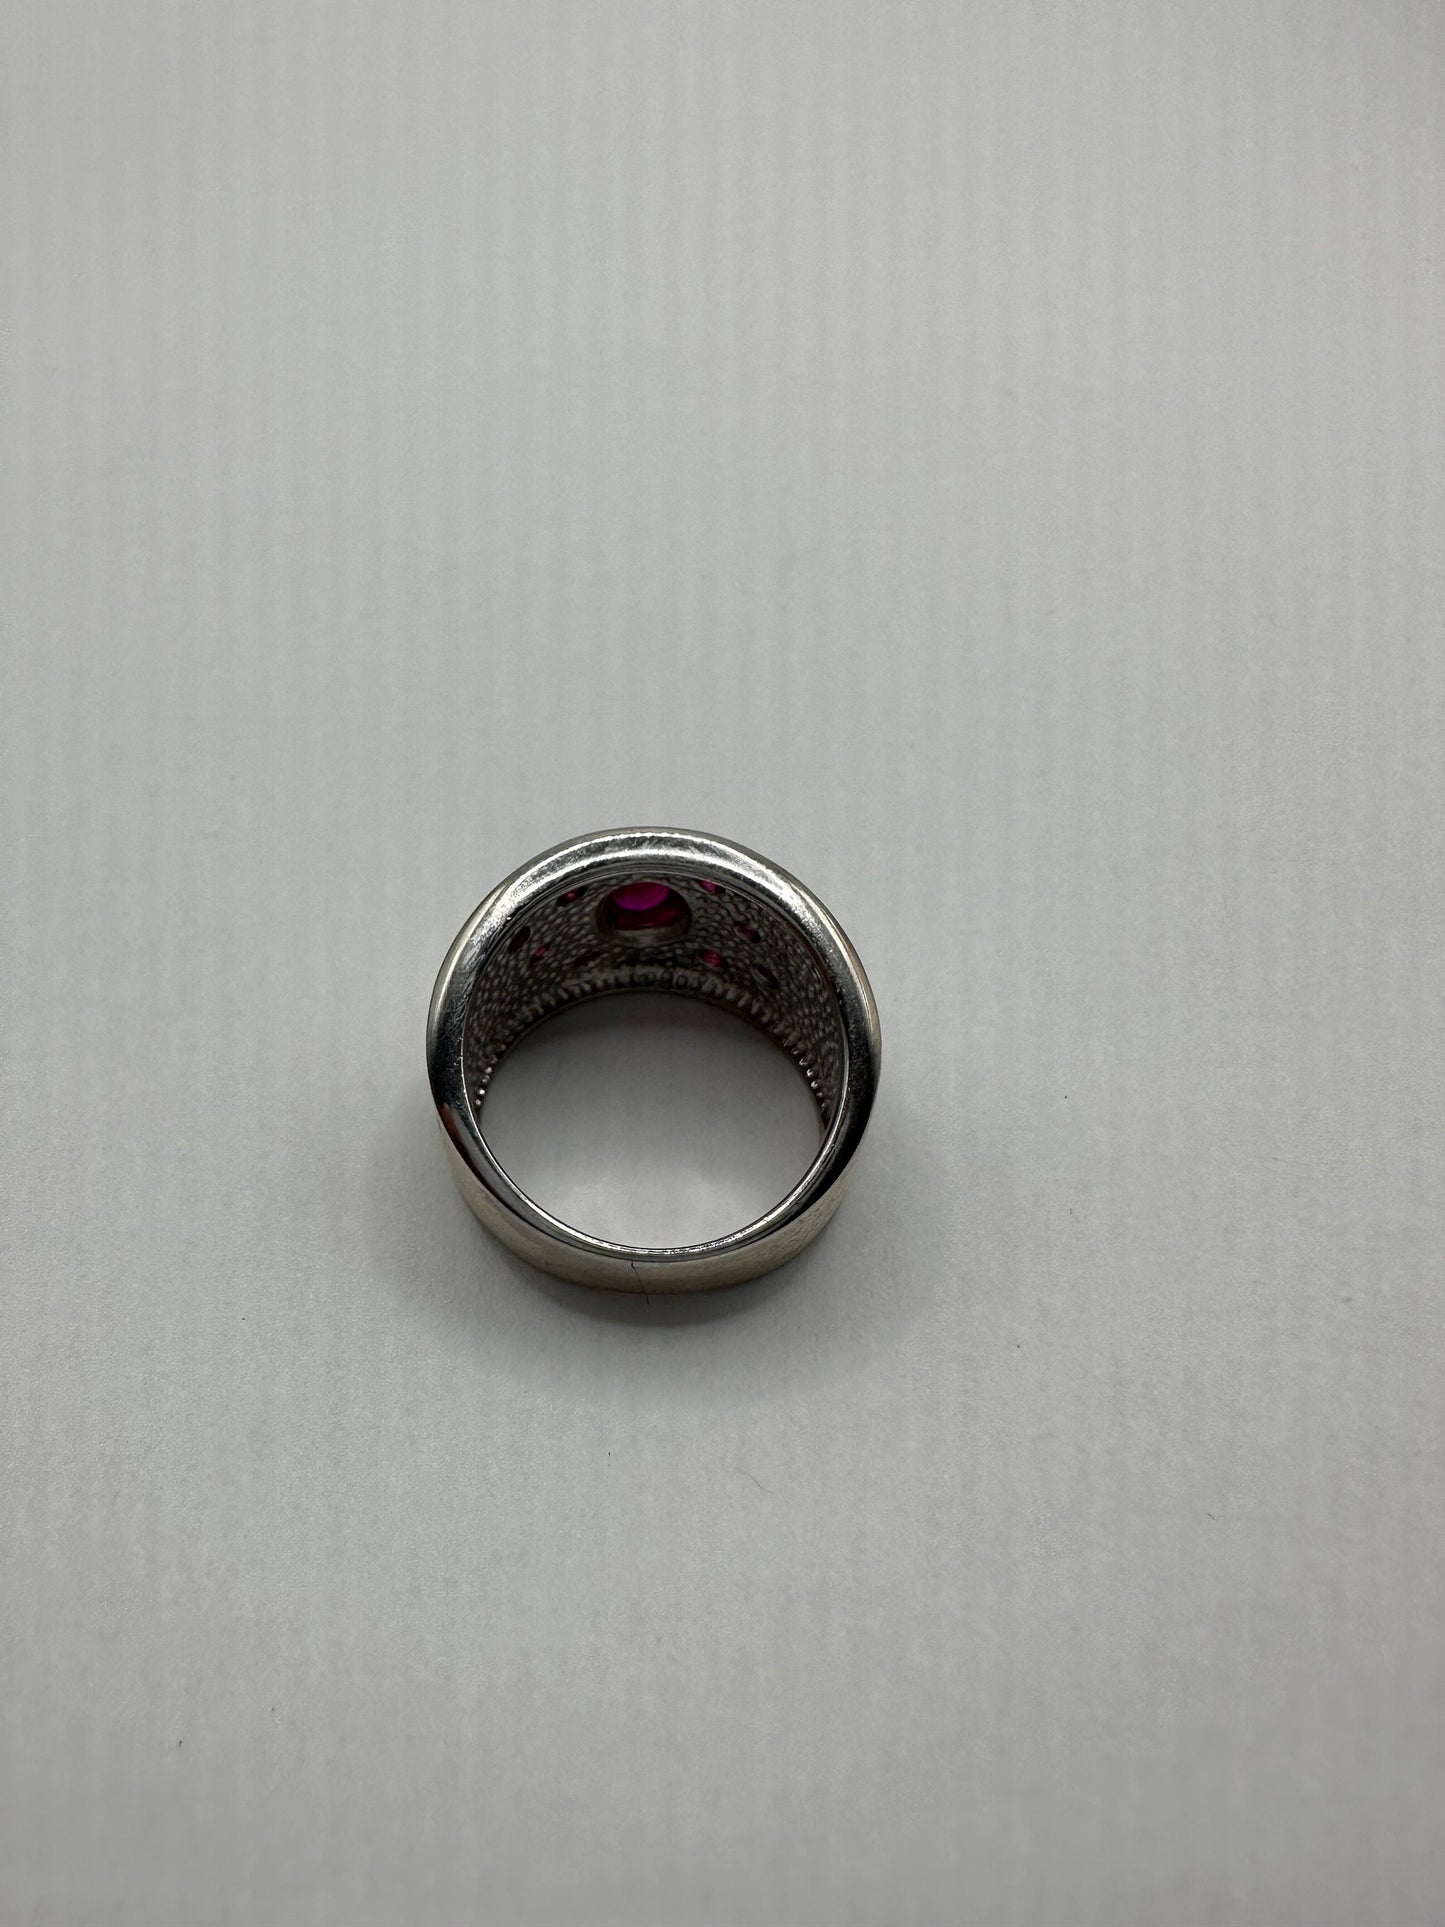 Vintage Pink Ruby 925 Sterling Silver Wedding Band Ring